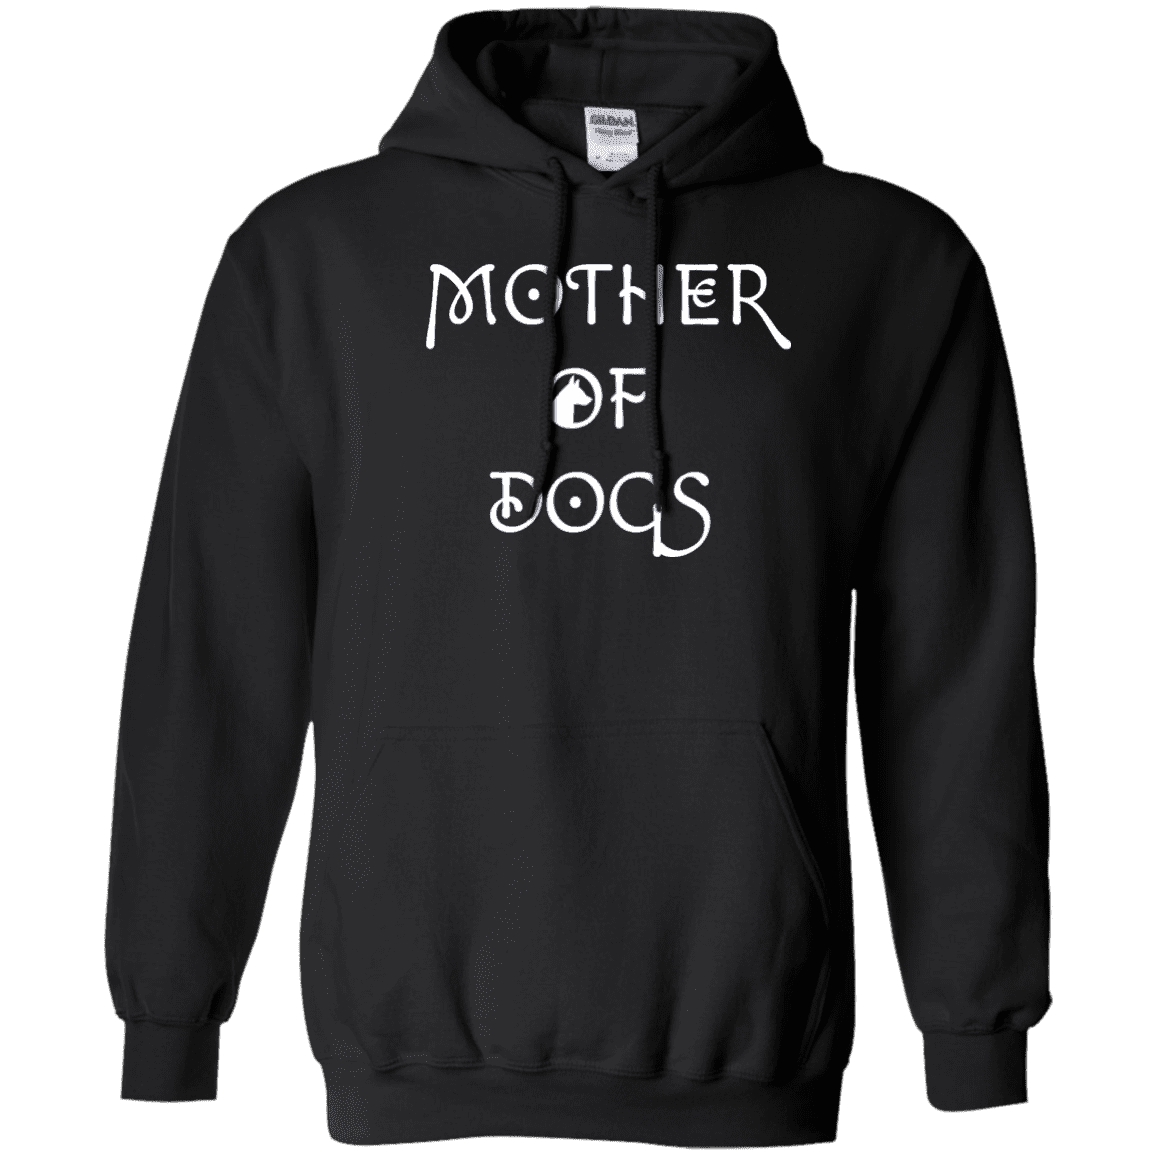 Mother Of Dogs - Hoodie.